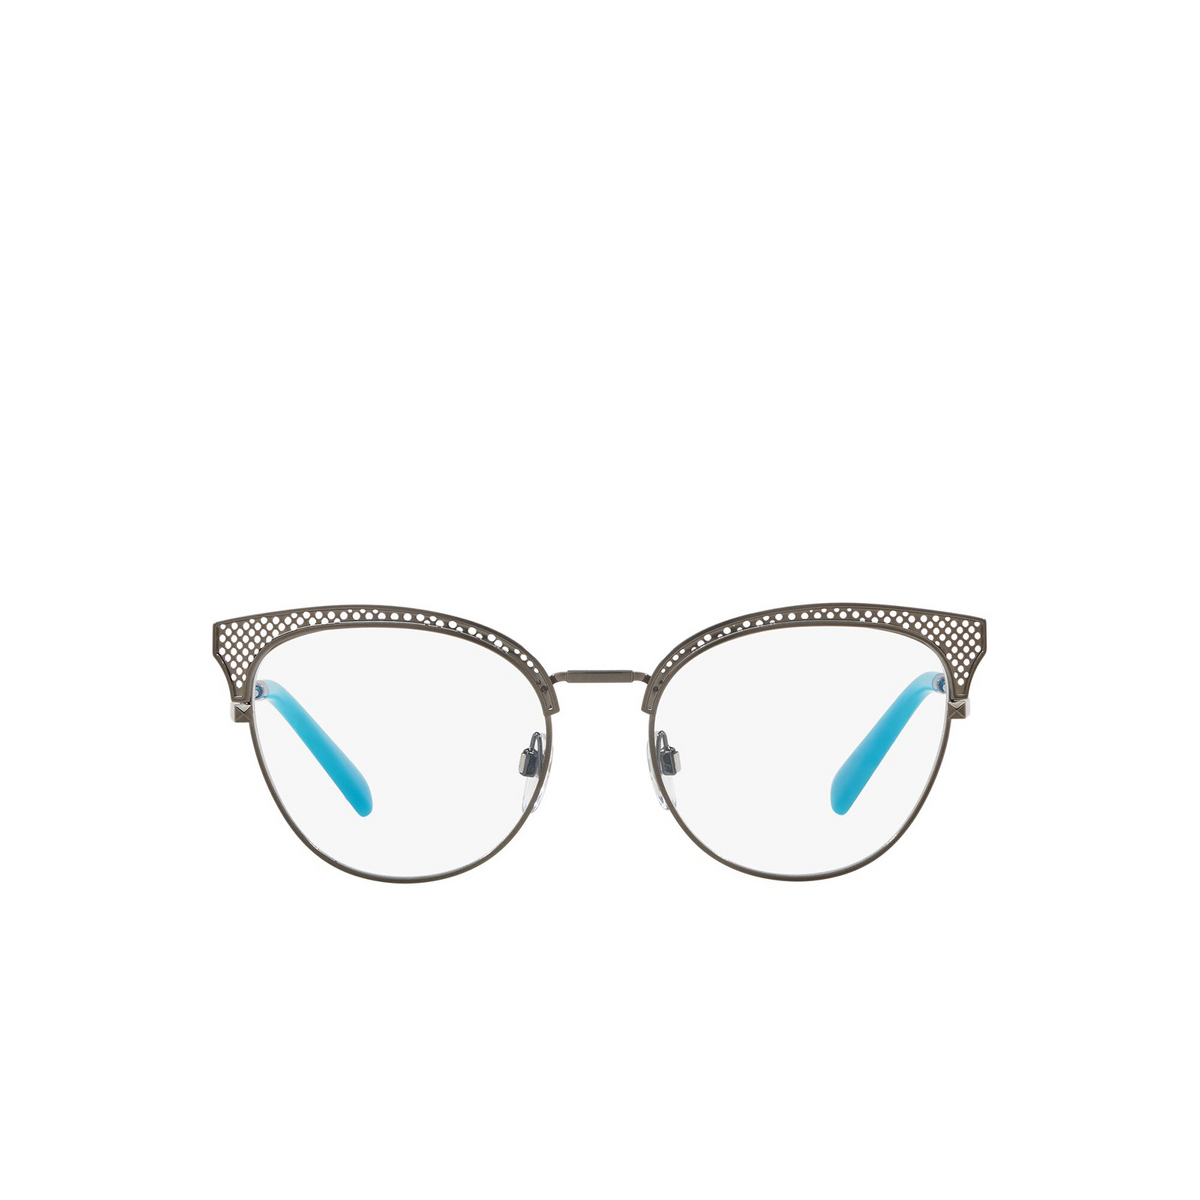 Valentino® Butterfly Eyeglasses: VA1011 color Ruthenium 3039 - front view.